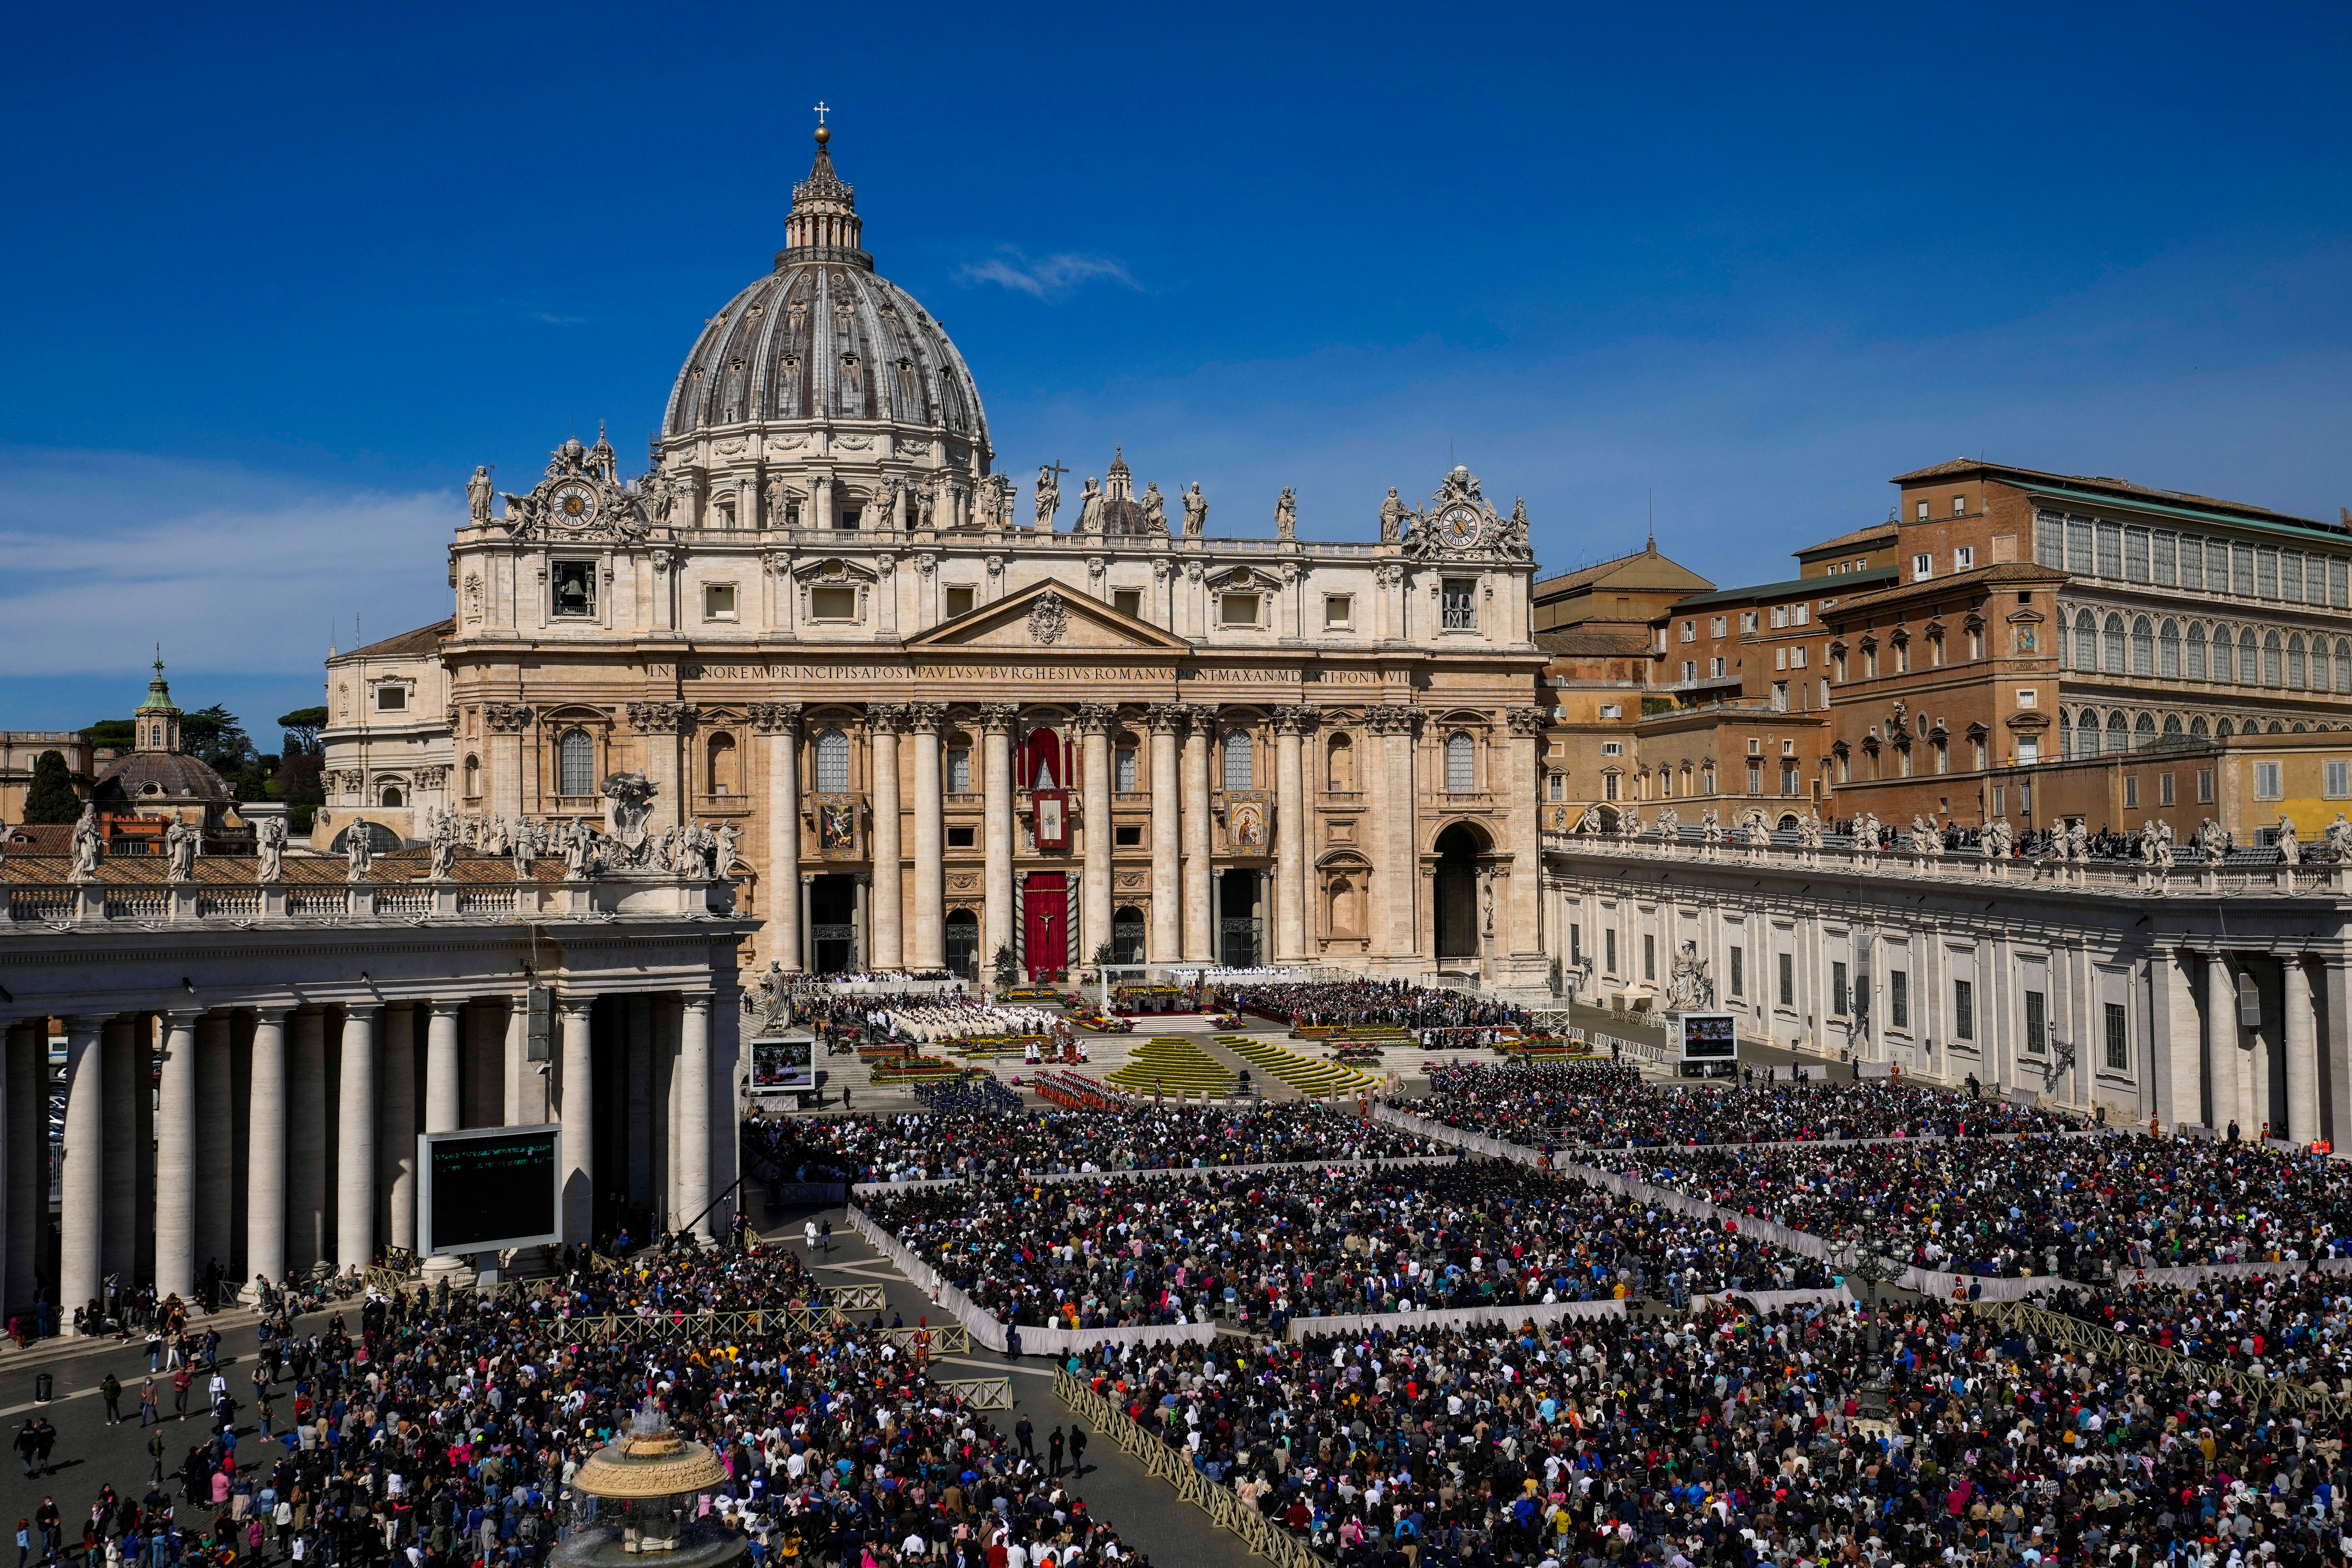 Pope leads crowds in 1st outdoor Easter Mass since pandemic